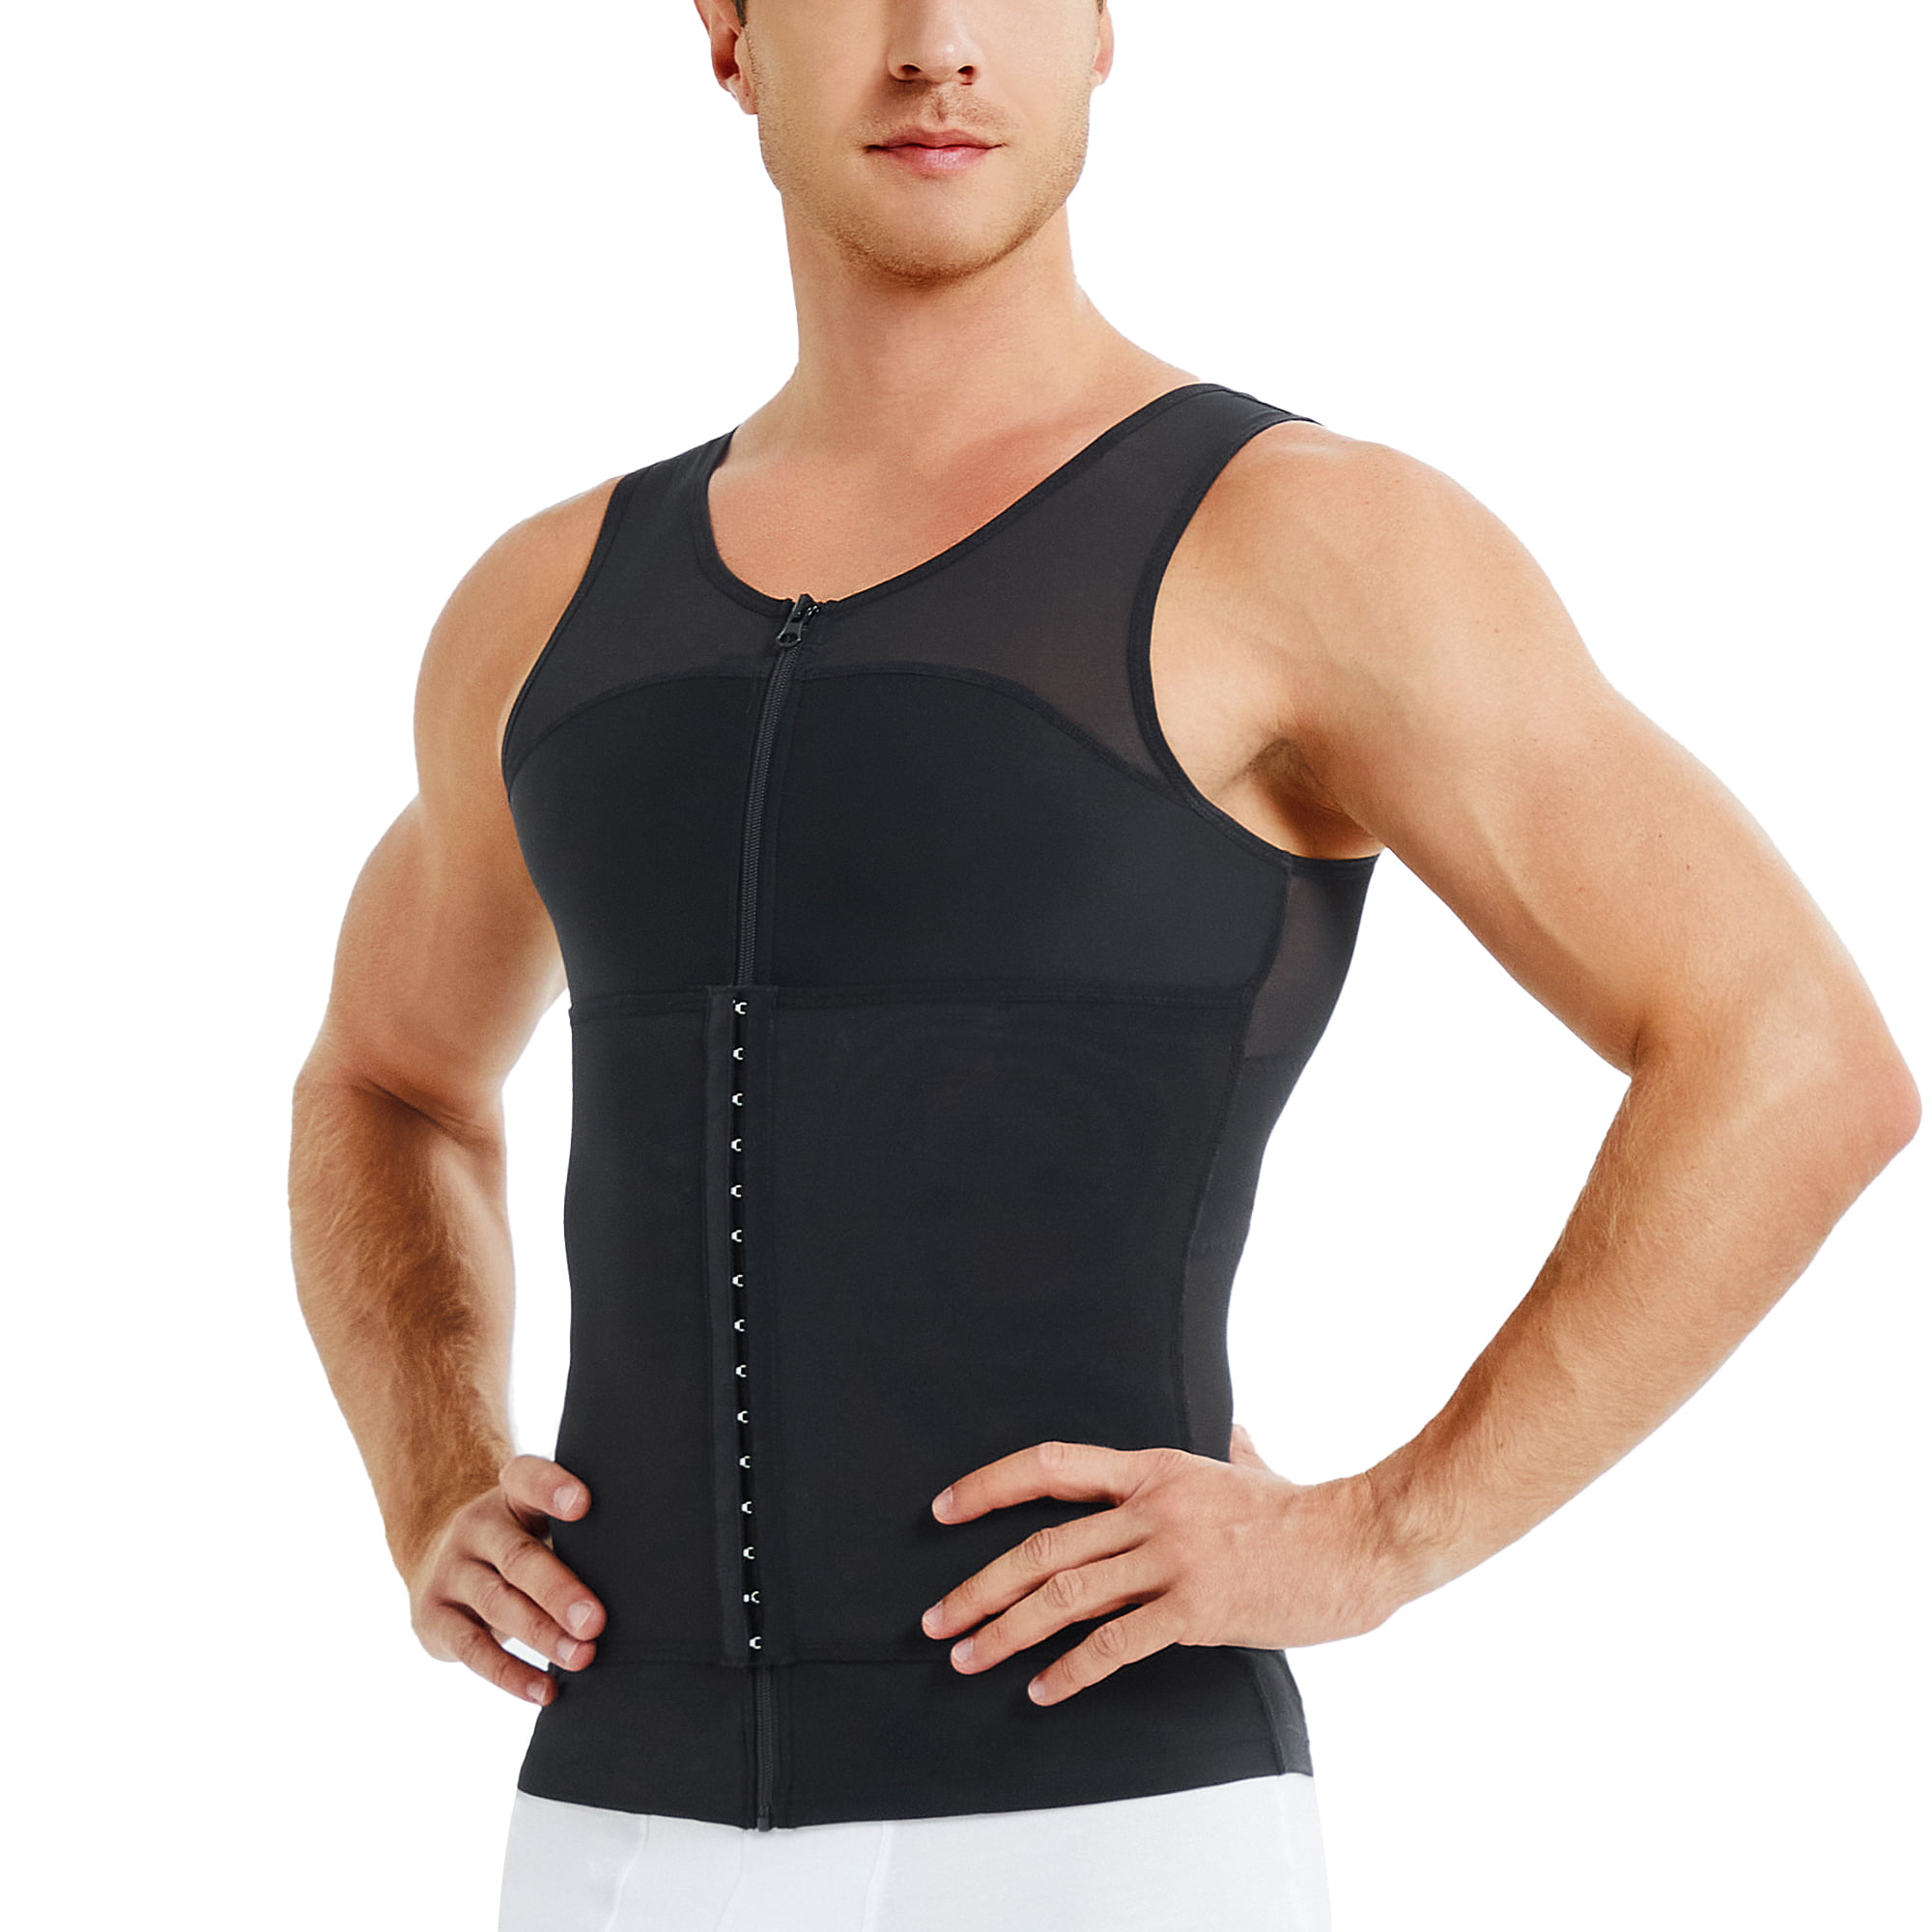 Farmacell 417 Mens Tummy Control Body Shaping Vest Tank Top